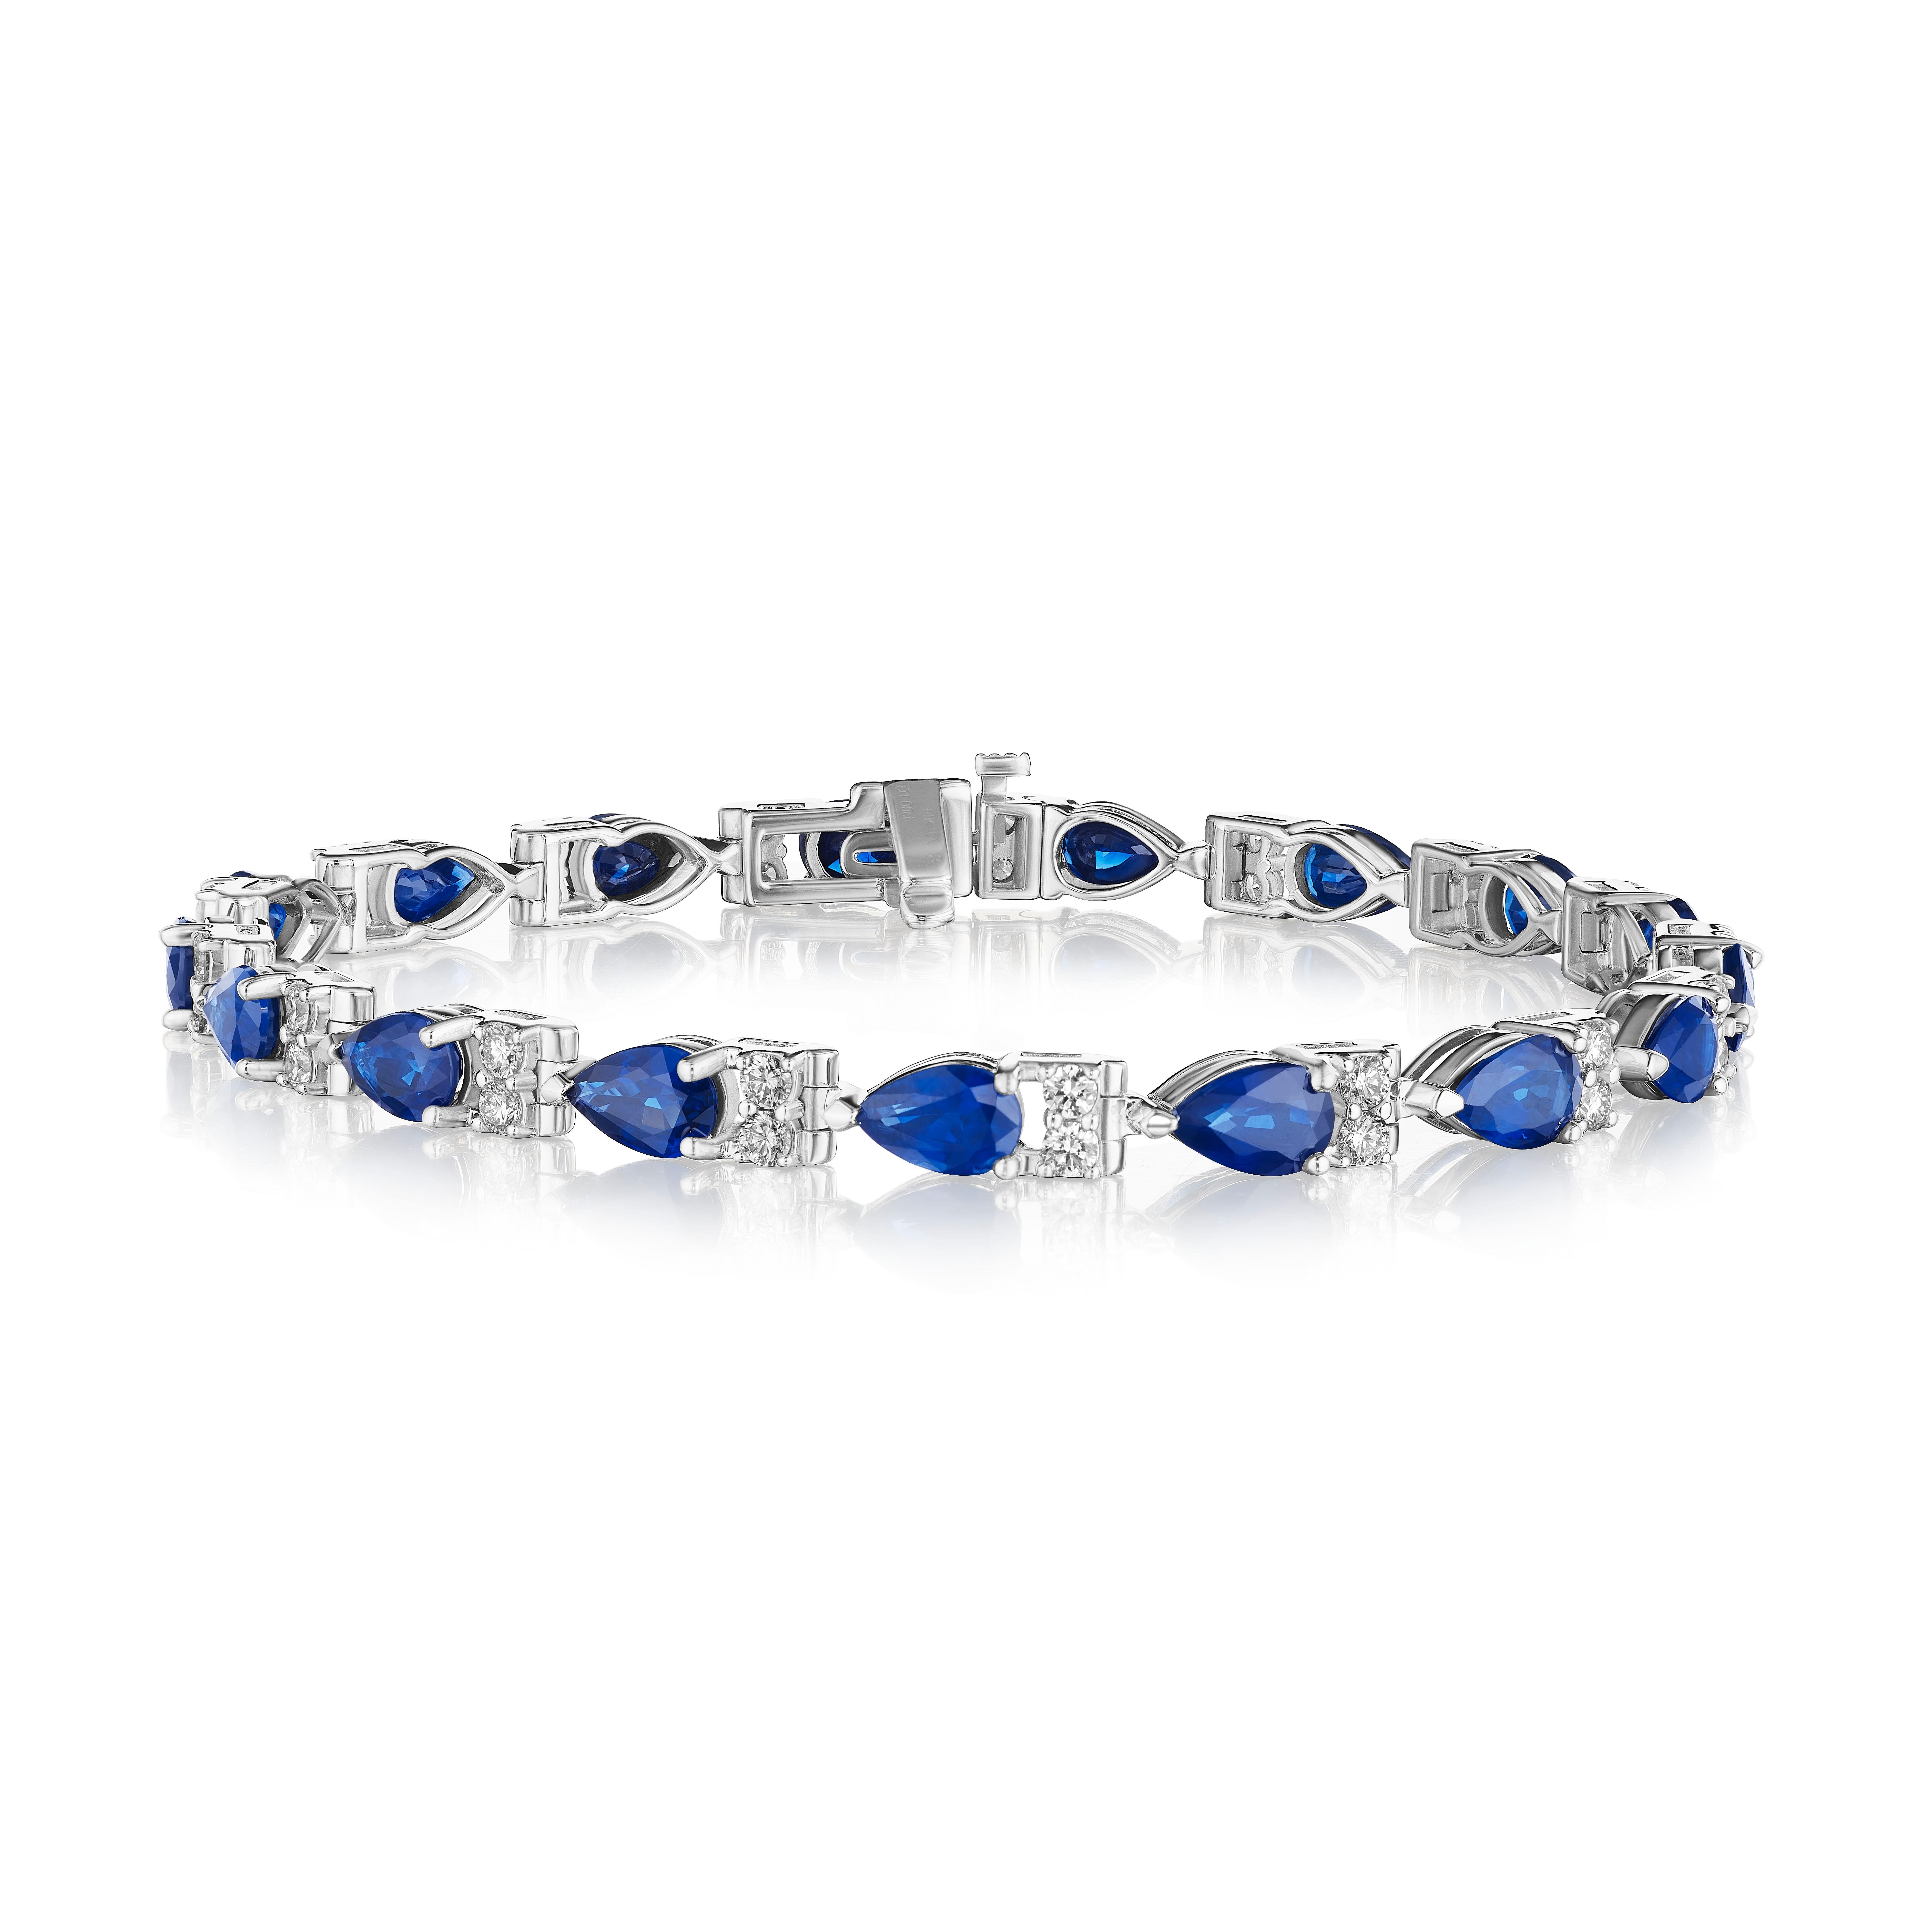 • A beautiful row of blue pear shape sapphires and white round brilliant cut diamonds encircle the wrist in this bracelet, set in 14KT gold. The bracelet measures 7